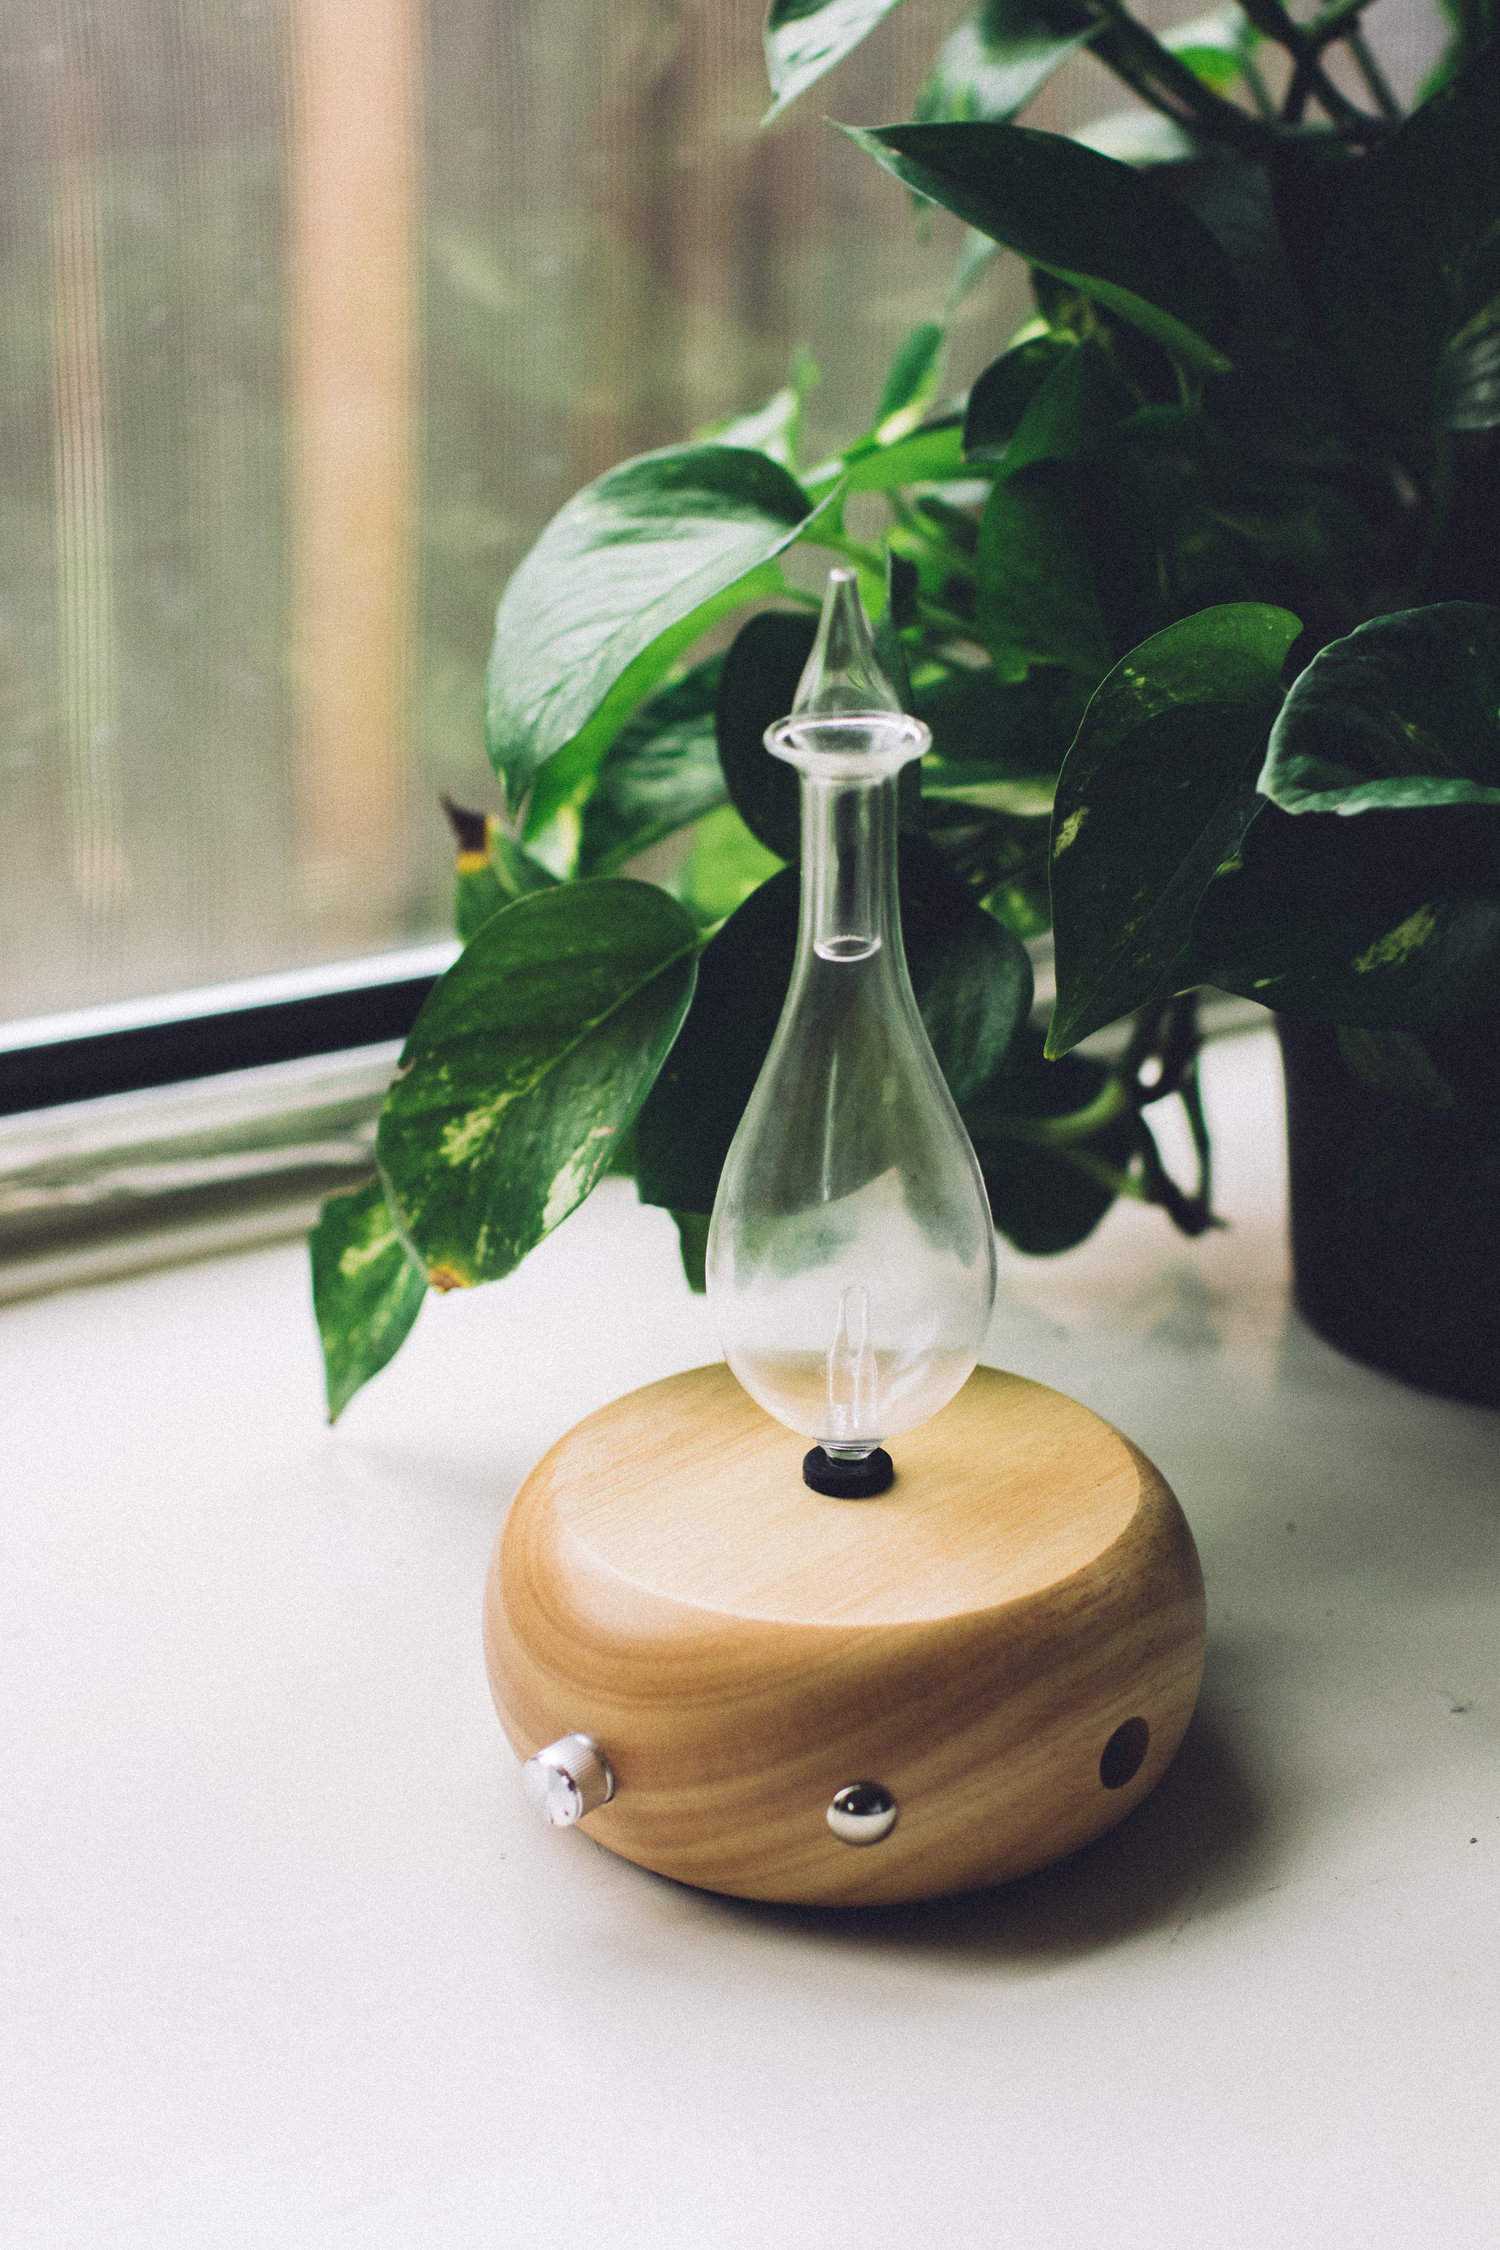 Organic Aromas "Magnificant" Nebulizing Diffuser in light wood available on Amazon